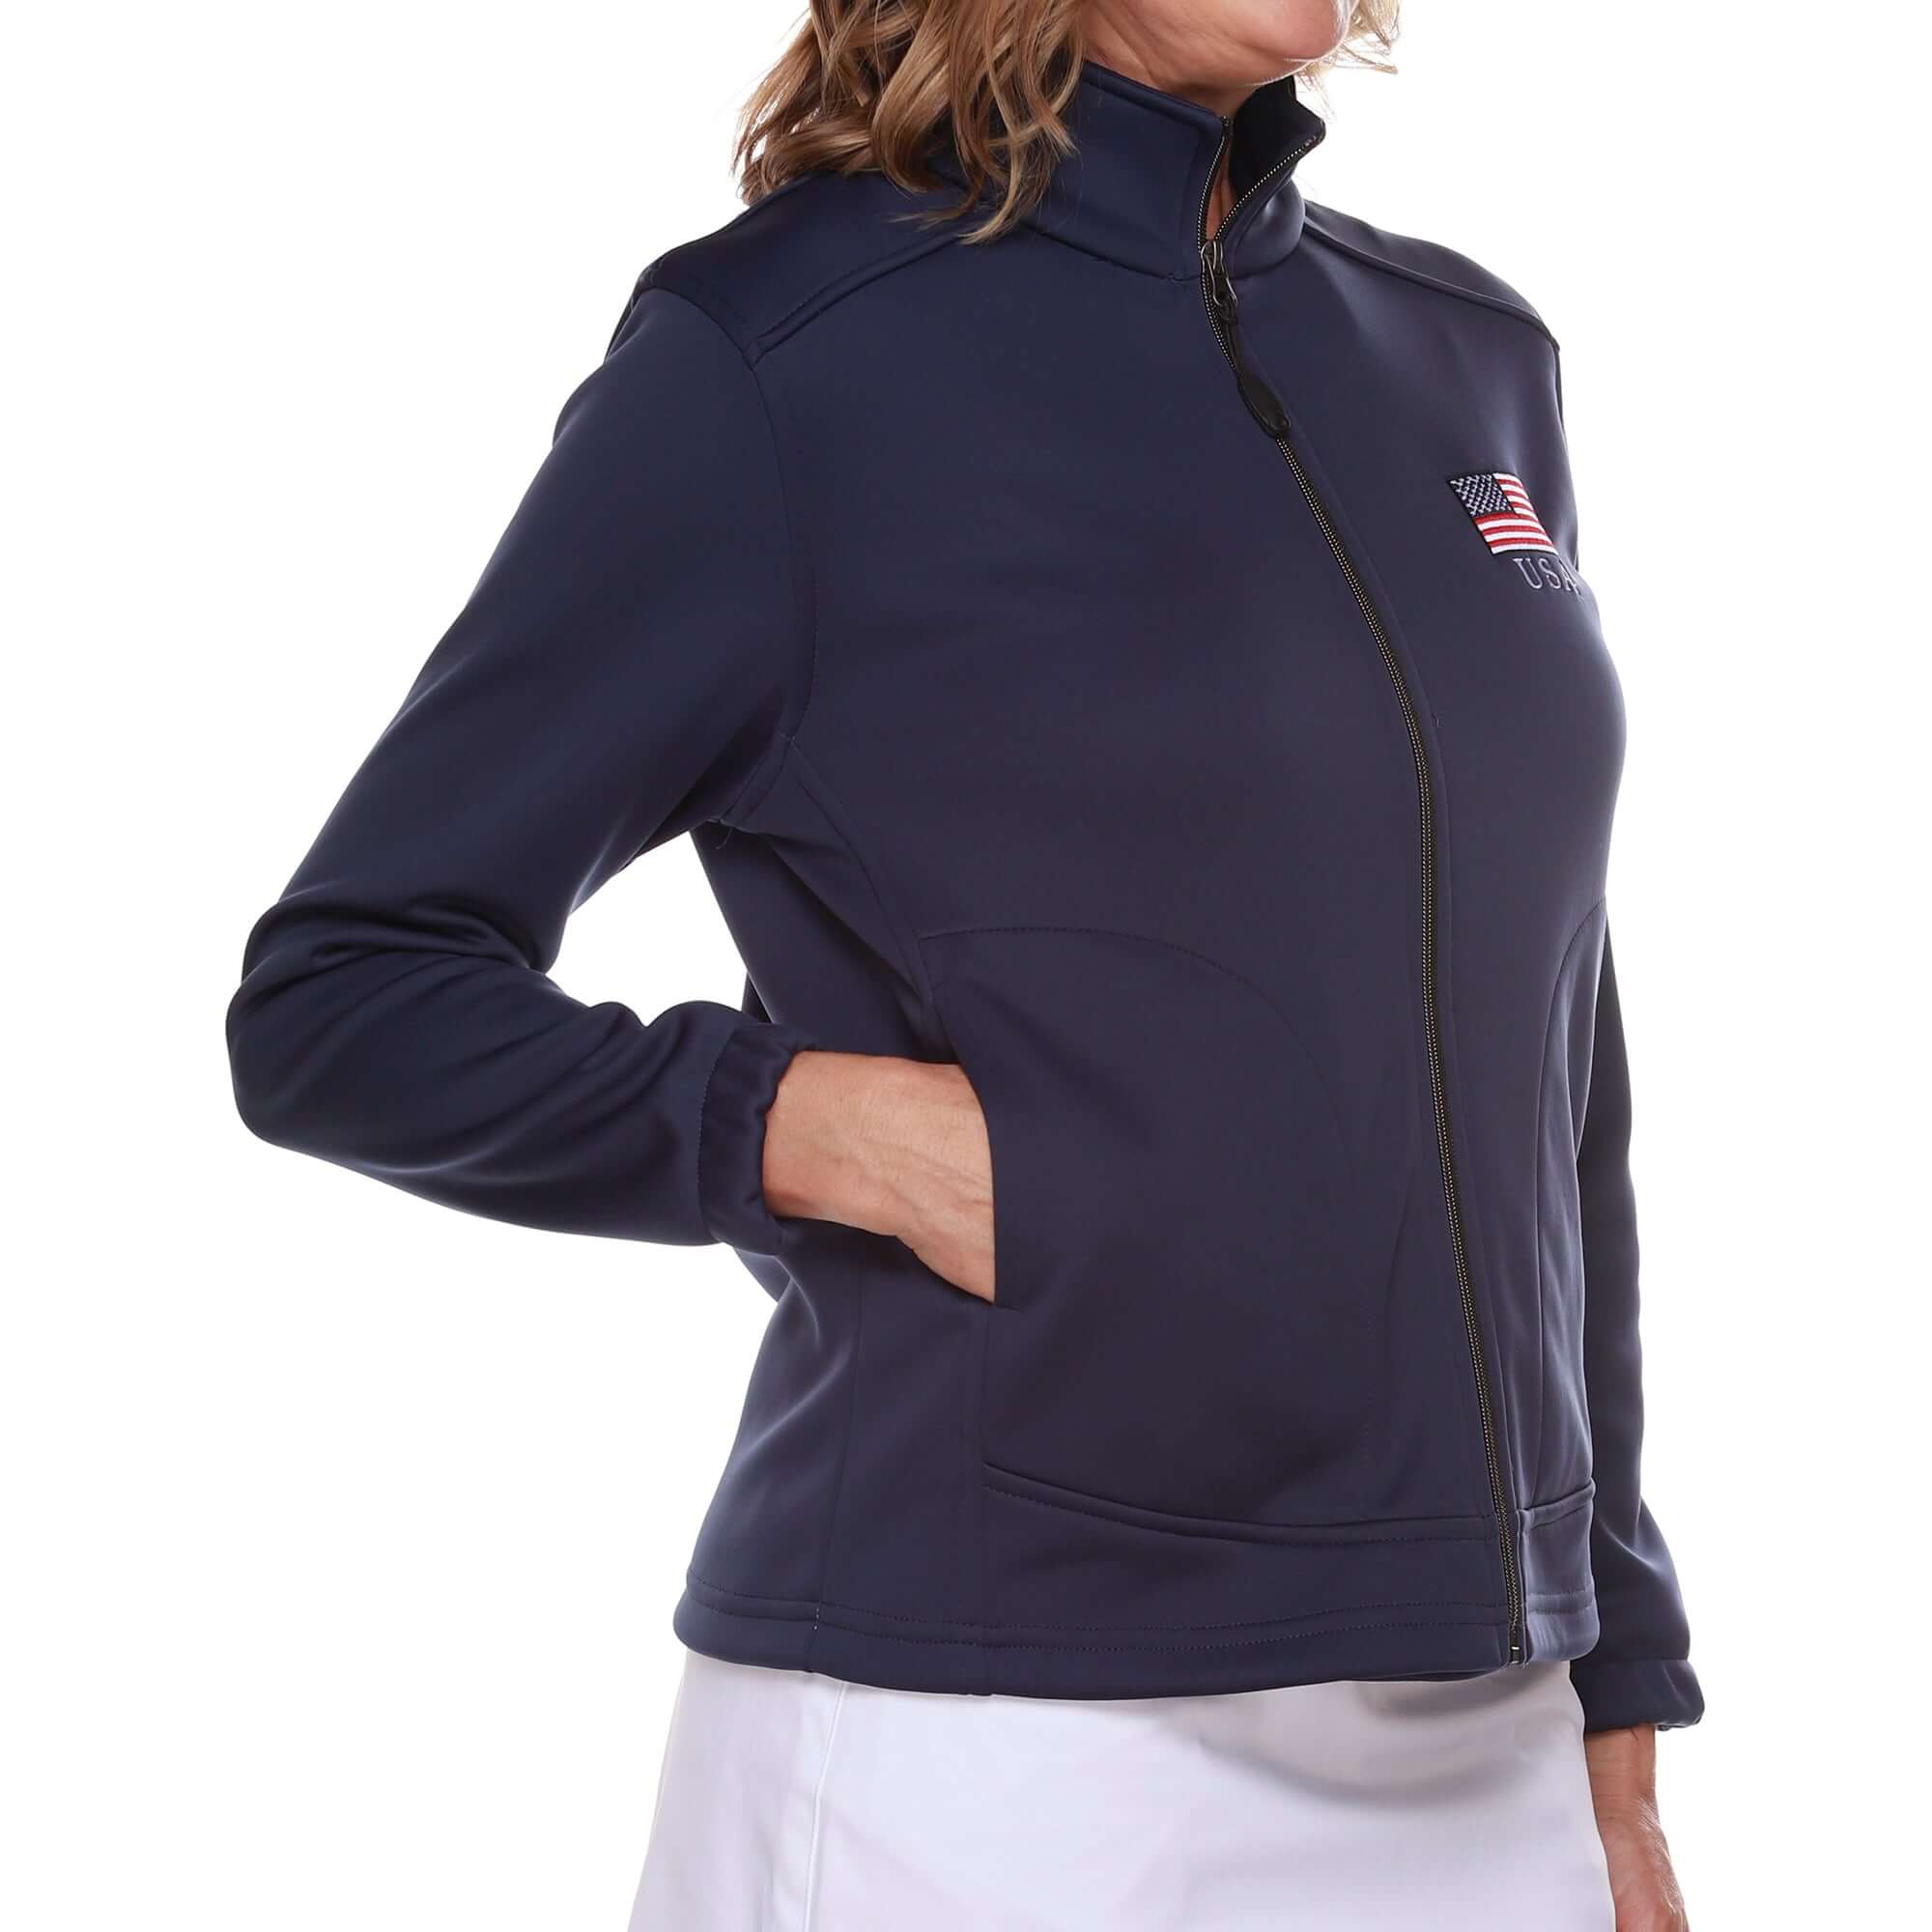 Women's Patriotic Made in USA Softshell Jacket